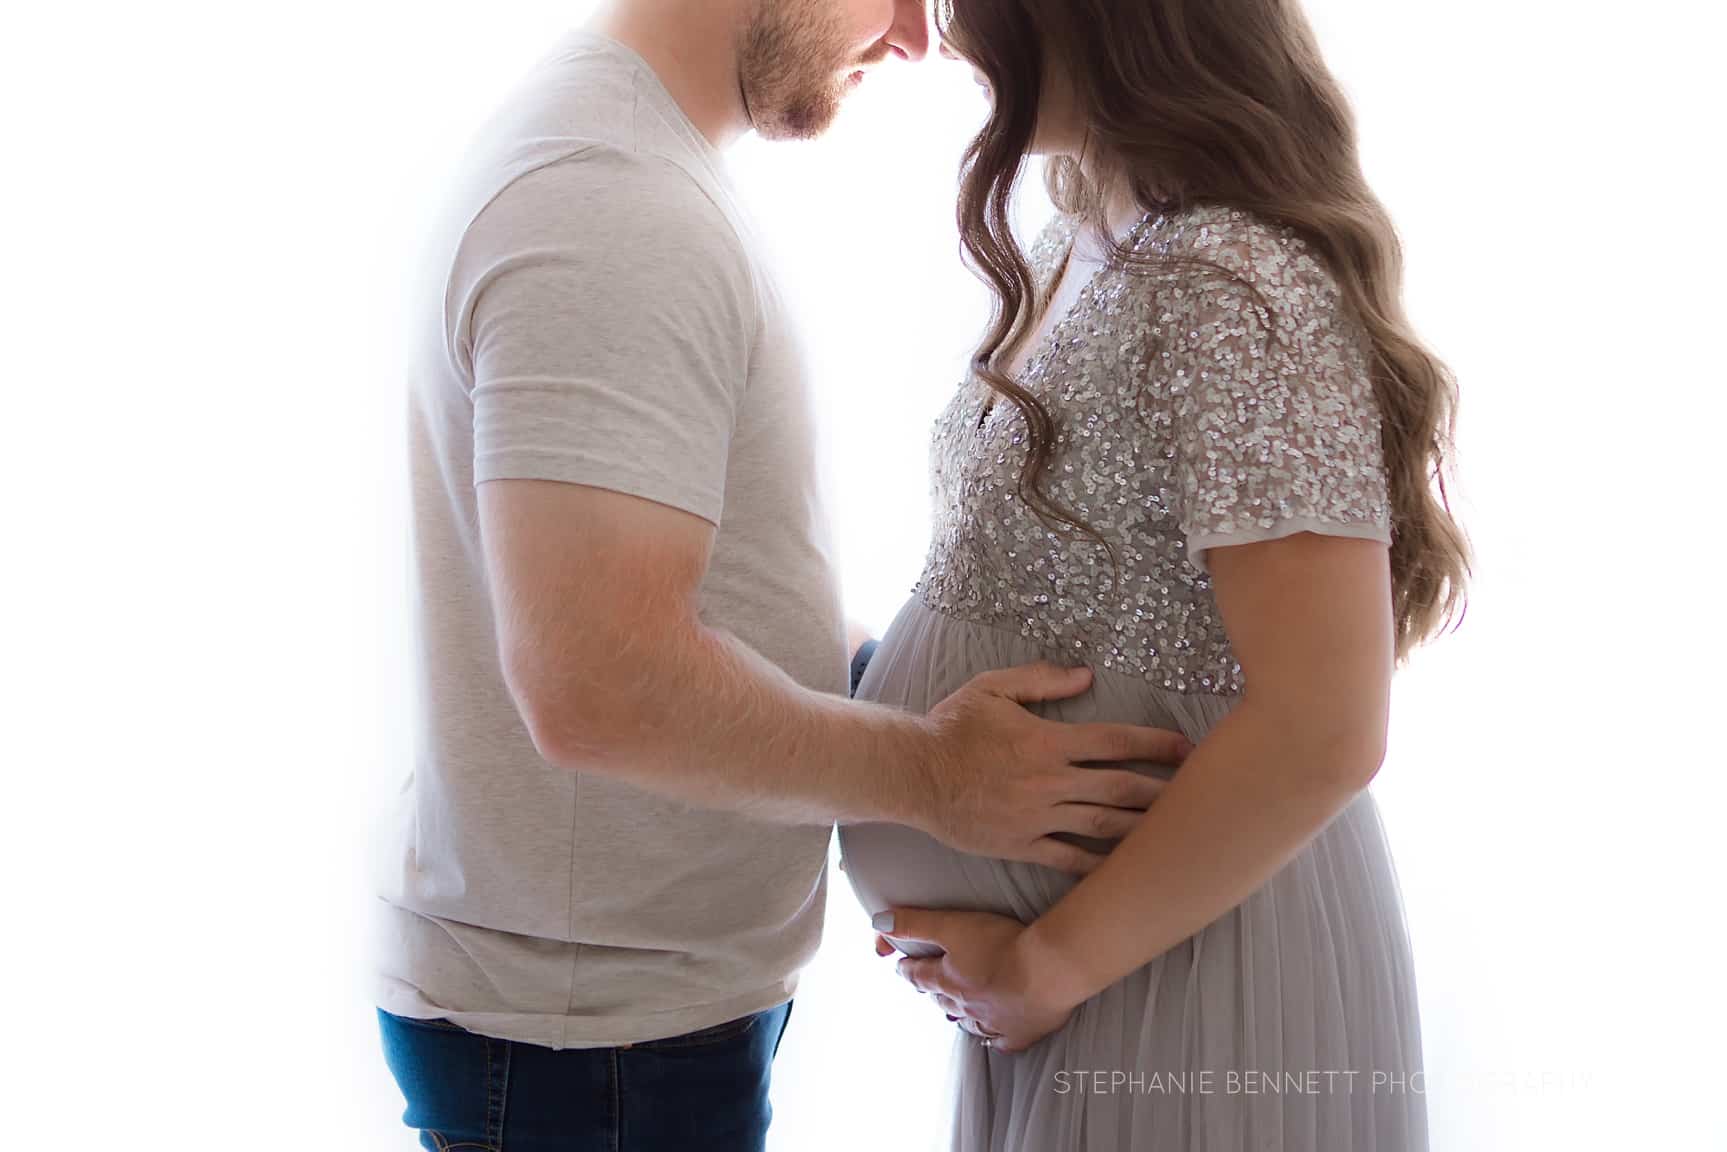 How Far In Advance Should I Book Maternity Pictures